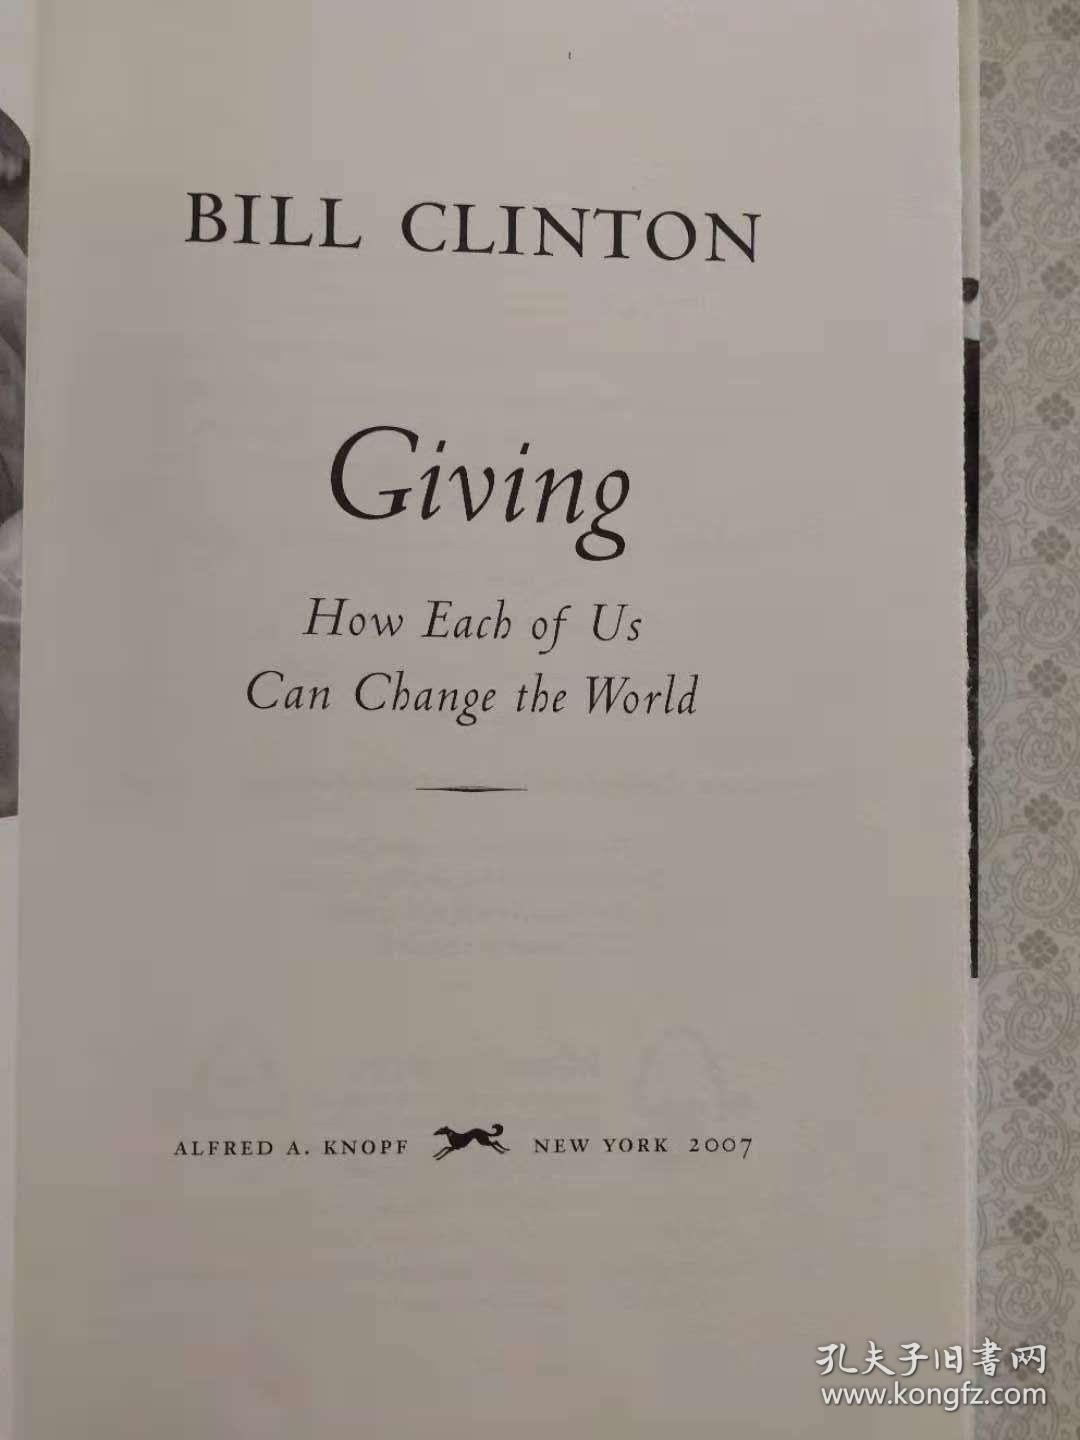 Giving  How Each of Us Can Change The World    Bill Clinton 英文原版